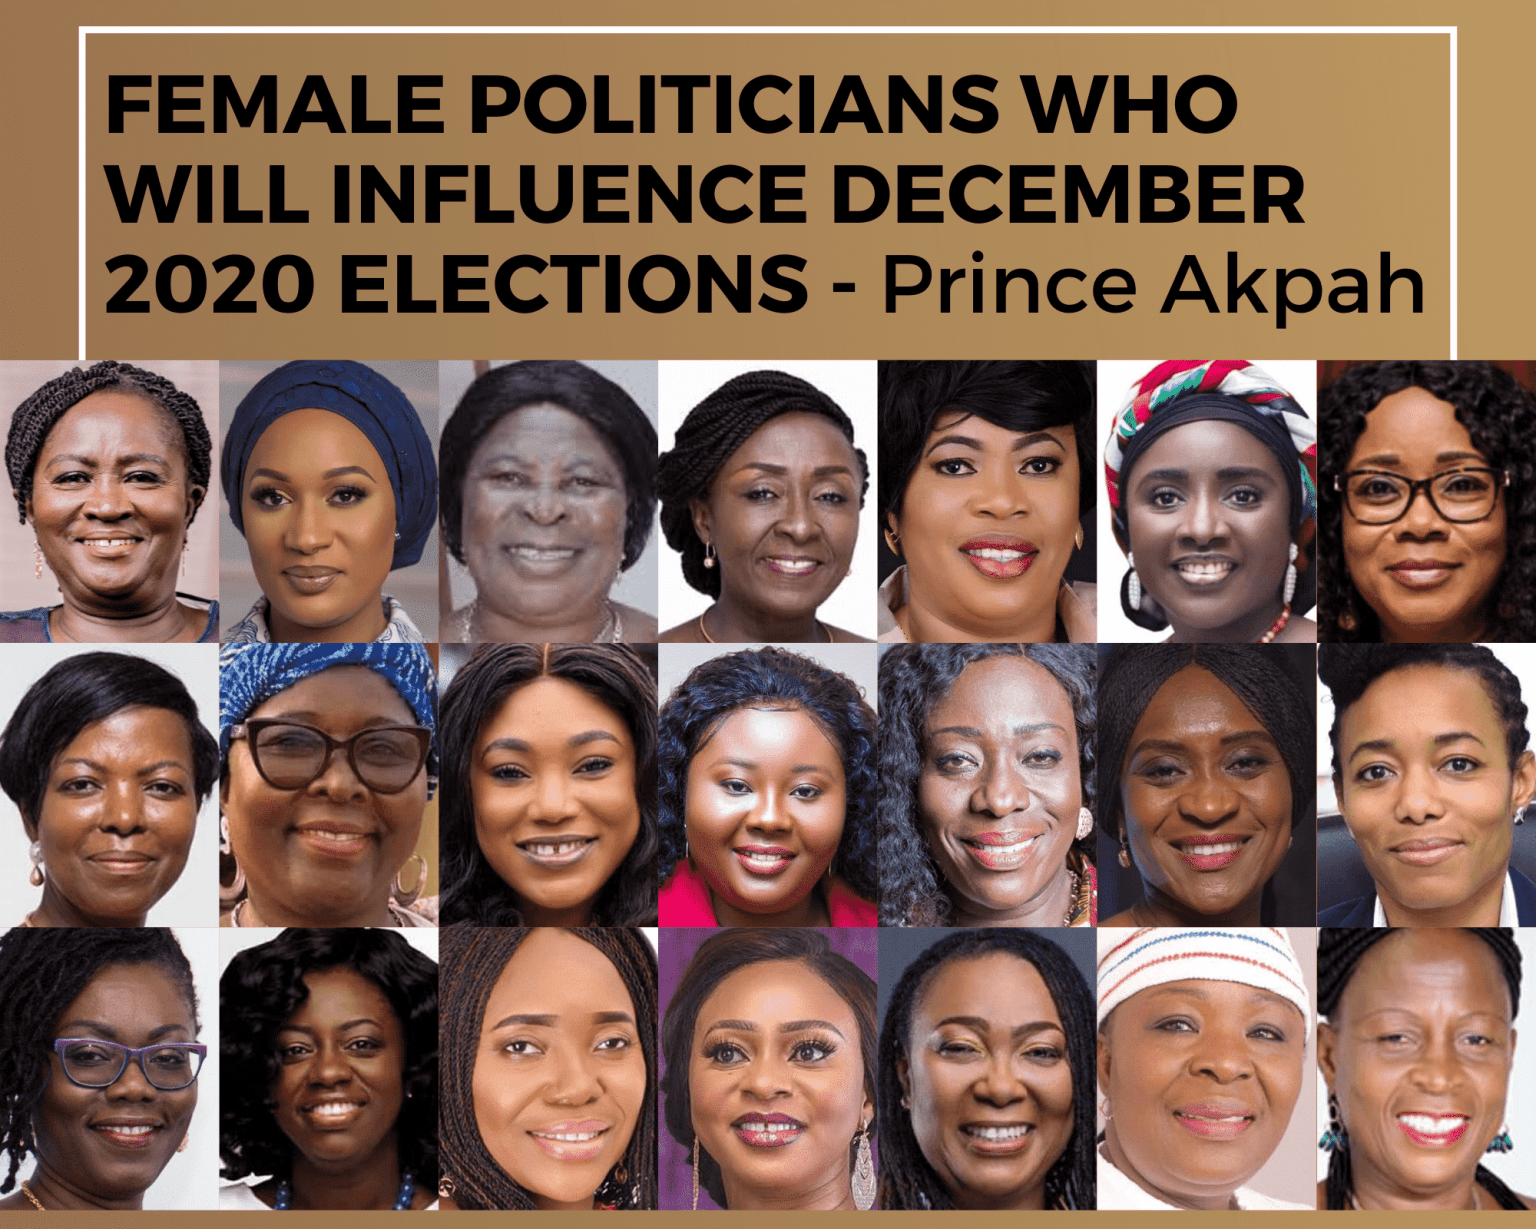 Female Politicians in the line up to influence decisions in Ghana’s upcoming Elections 2020